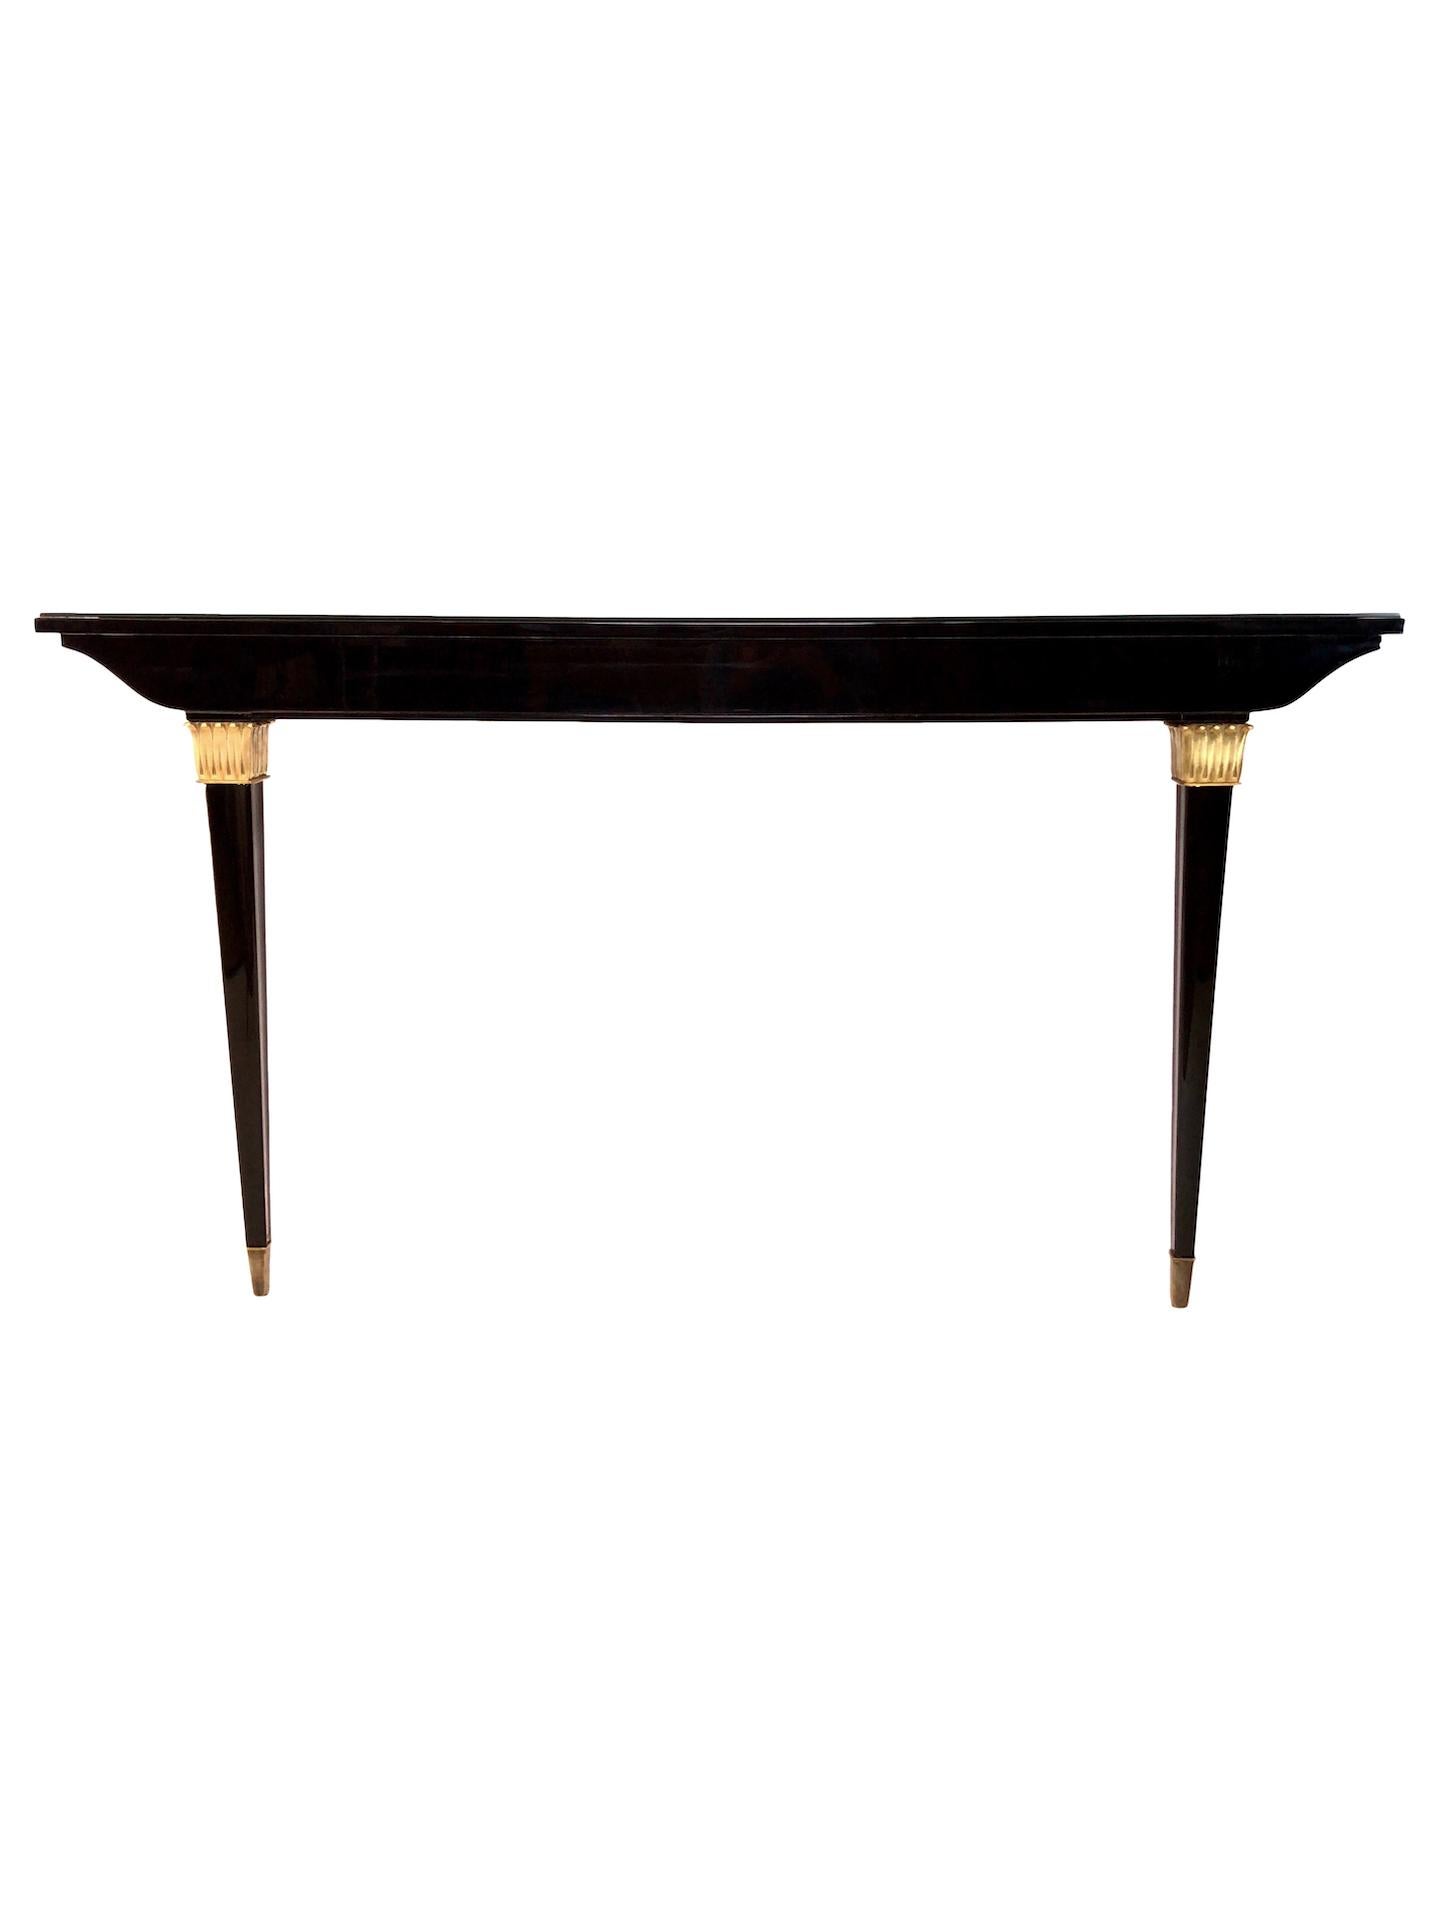 The combination of black piano lacquer and golden applications gives this console table its royal charm.
Original French Art Deco, circa 1935.
High gloss black piano lacquer
Black glass tabletop to protect the lacquer for daily use
Brass sabots